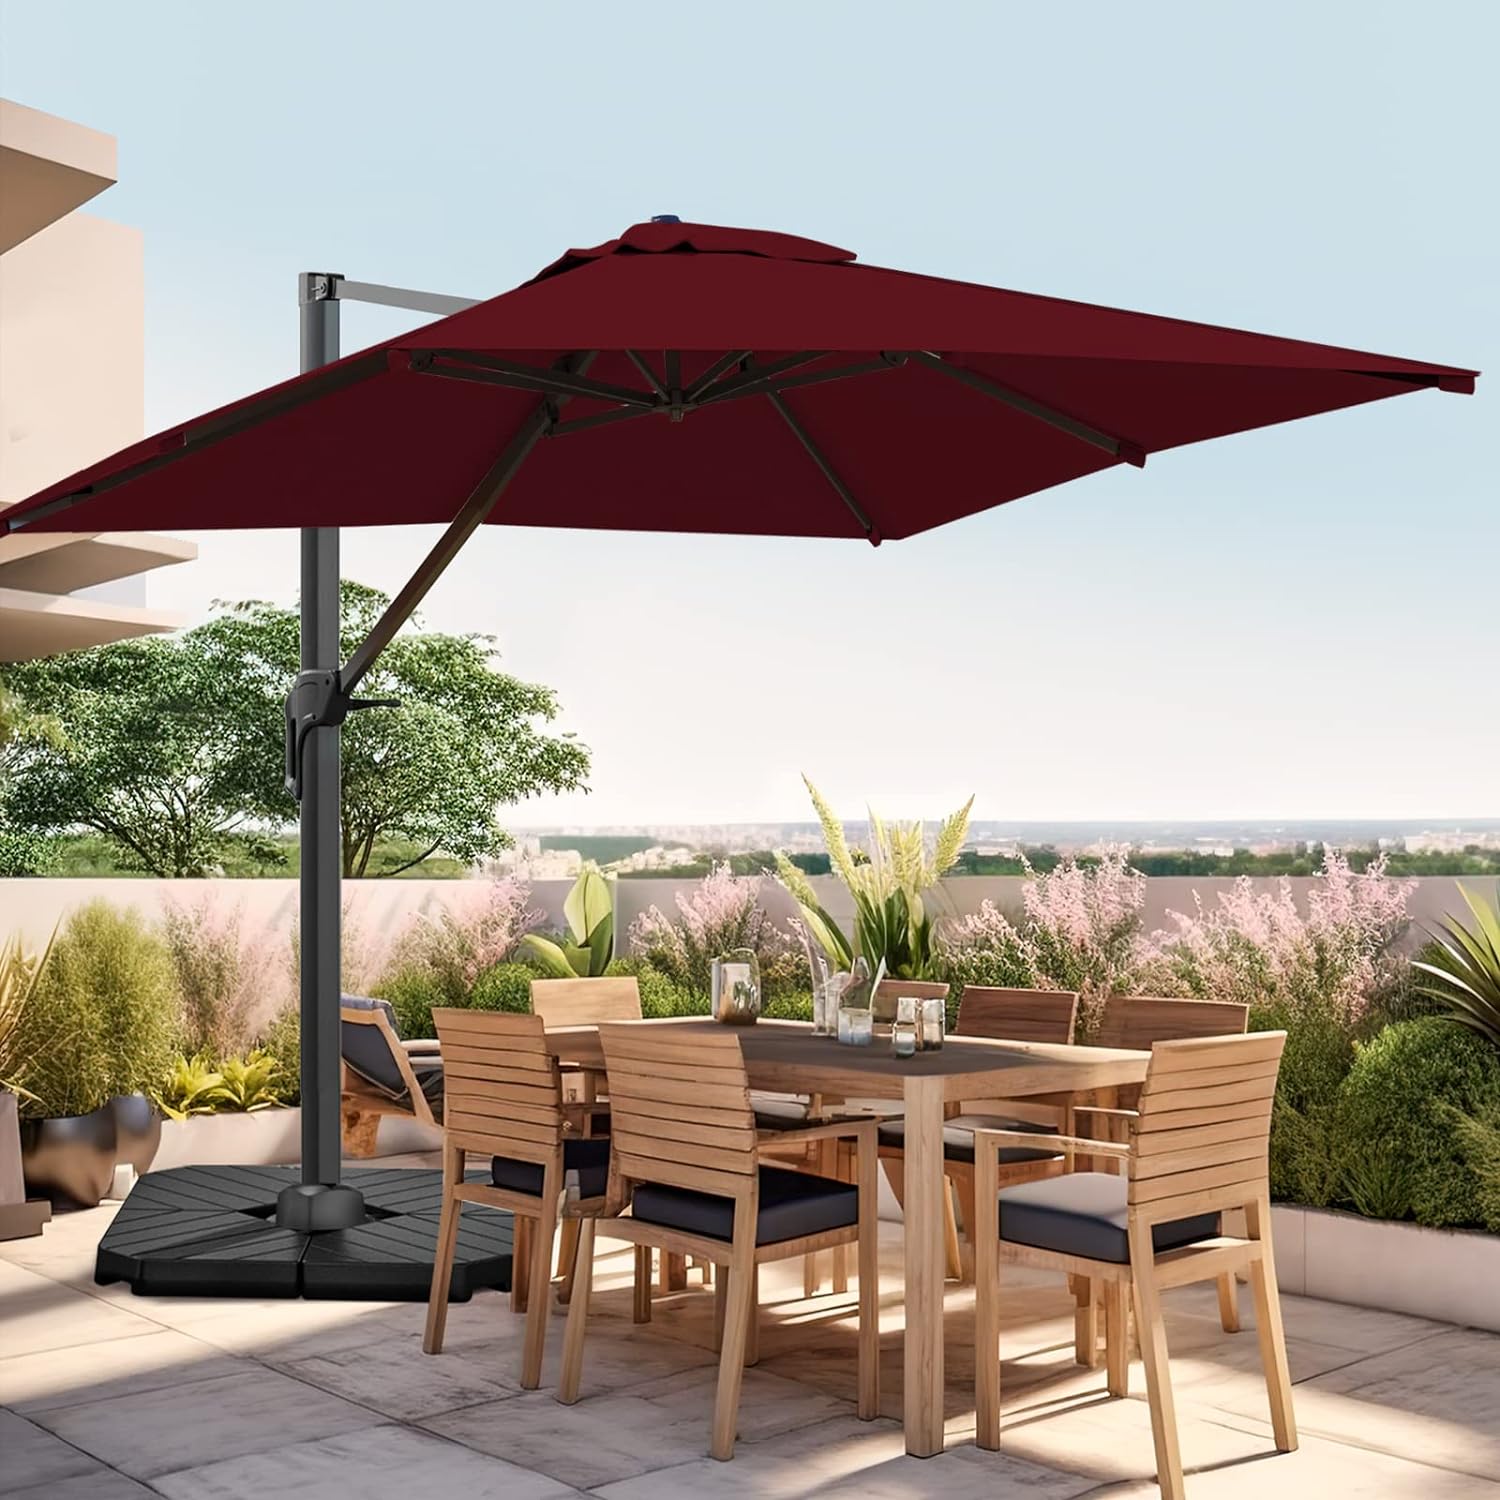 wikiwiki 10x10FT Cantilever Patio Umbrella Outdoor Offset Square Umbrella w/ 36 Month Fade Resistance Recycled Fabric, 6-Level 360Rotation Aluminum Pole for Deck Pool, Wine Red